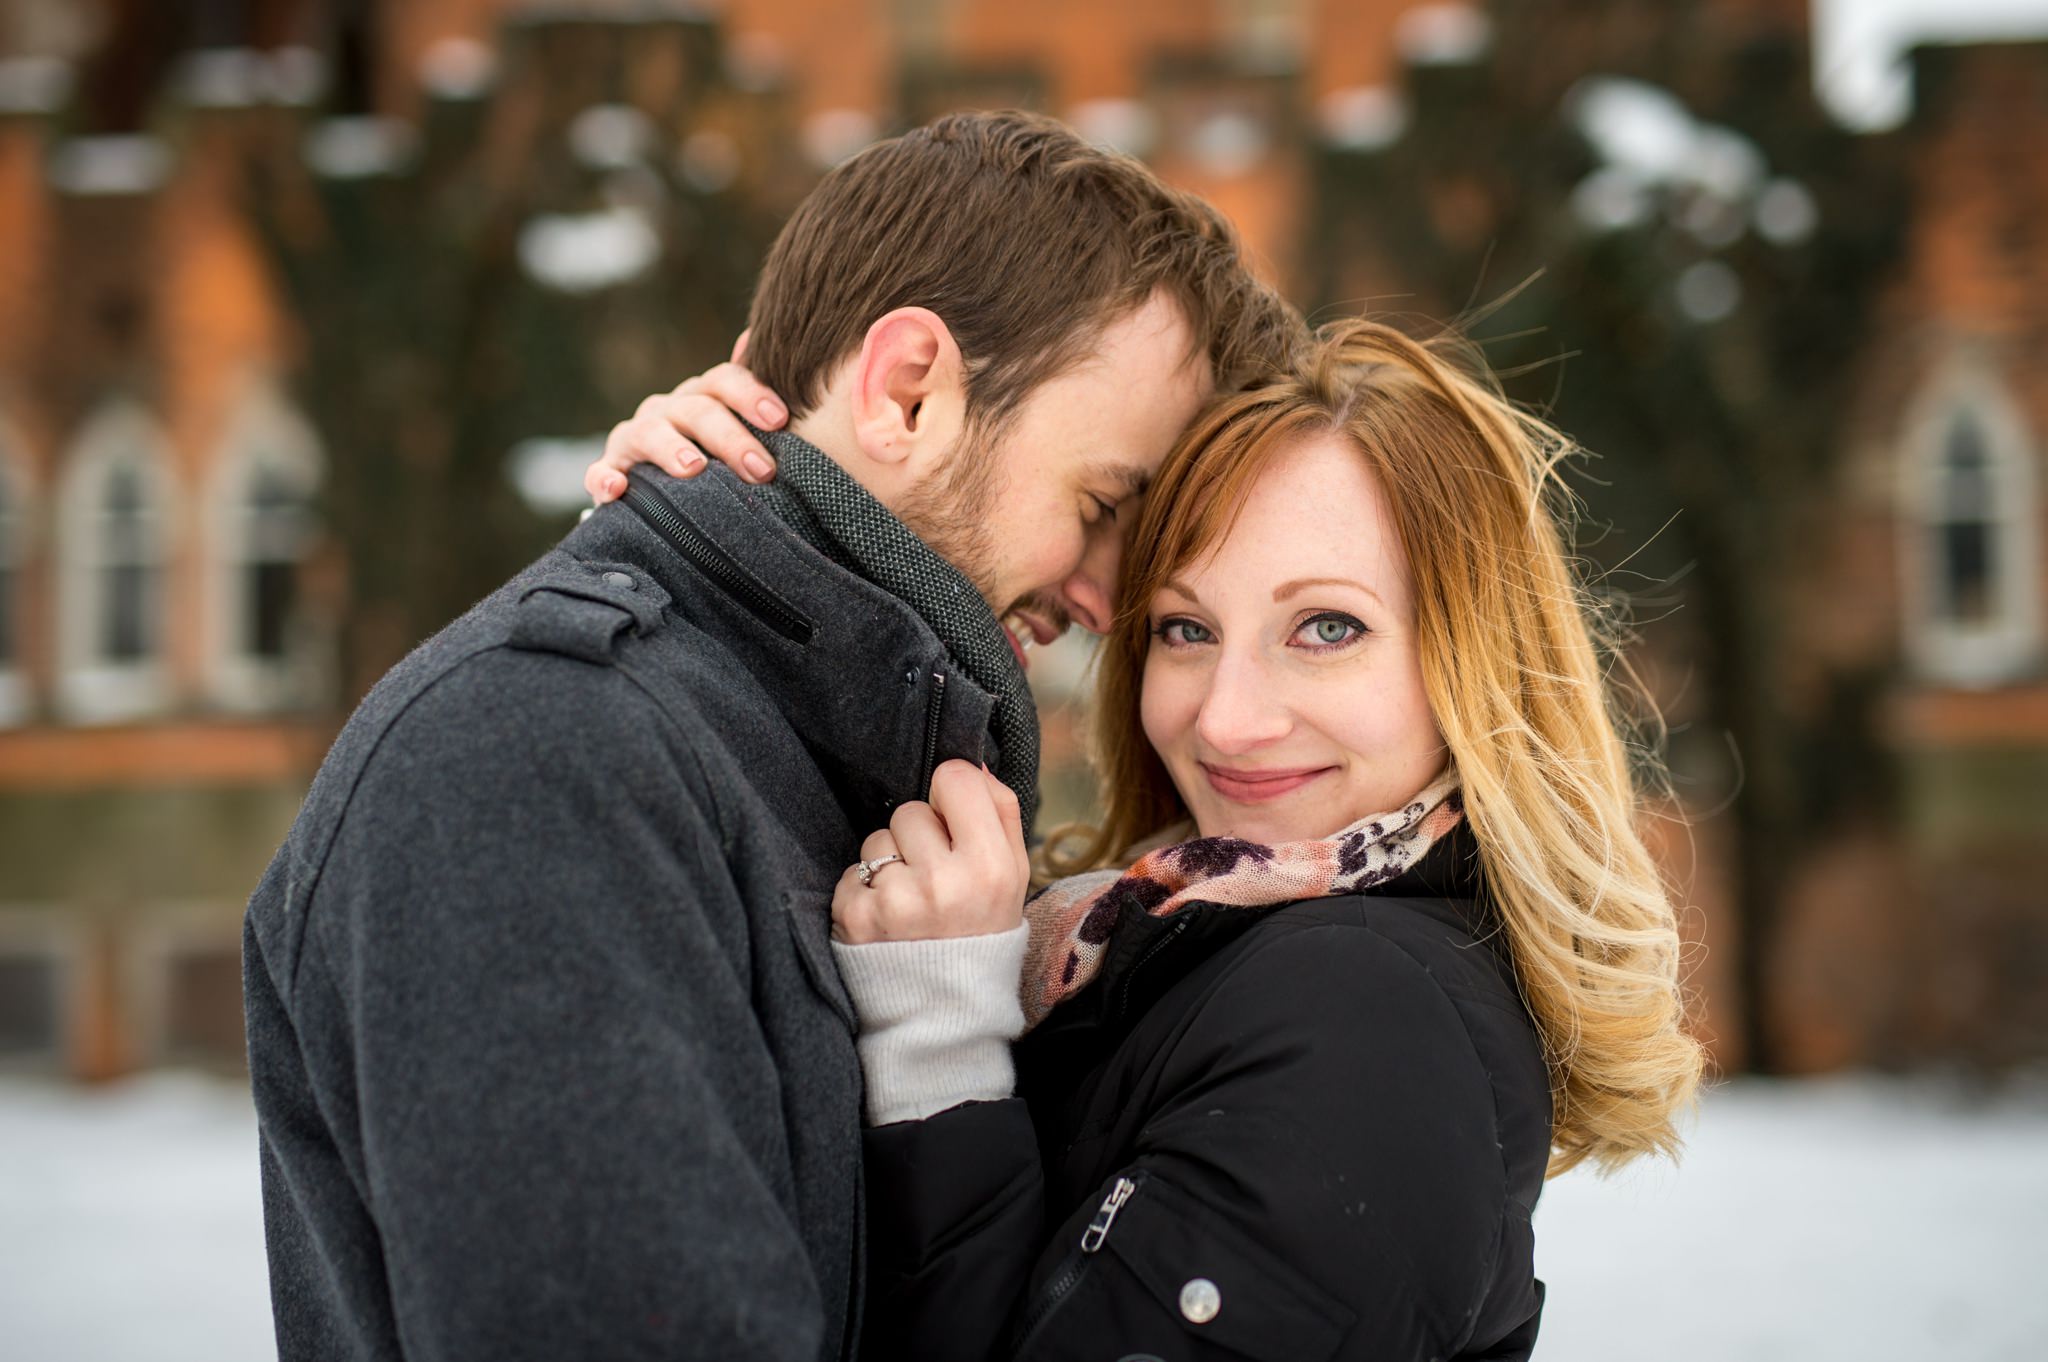 Grosse Pointe Academy Engagement Session